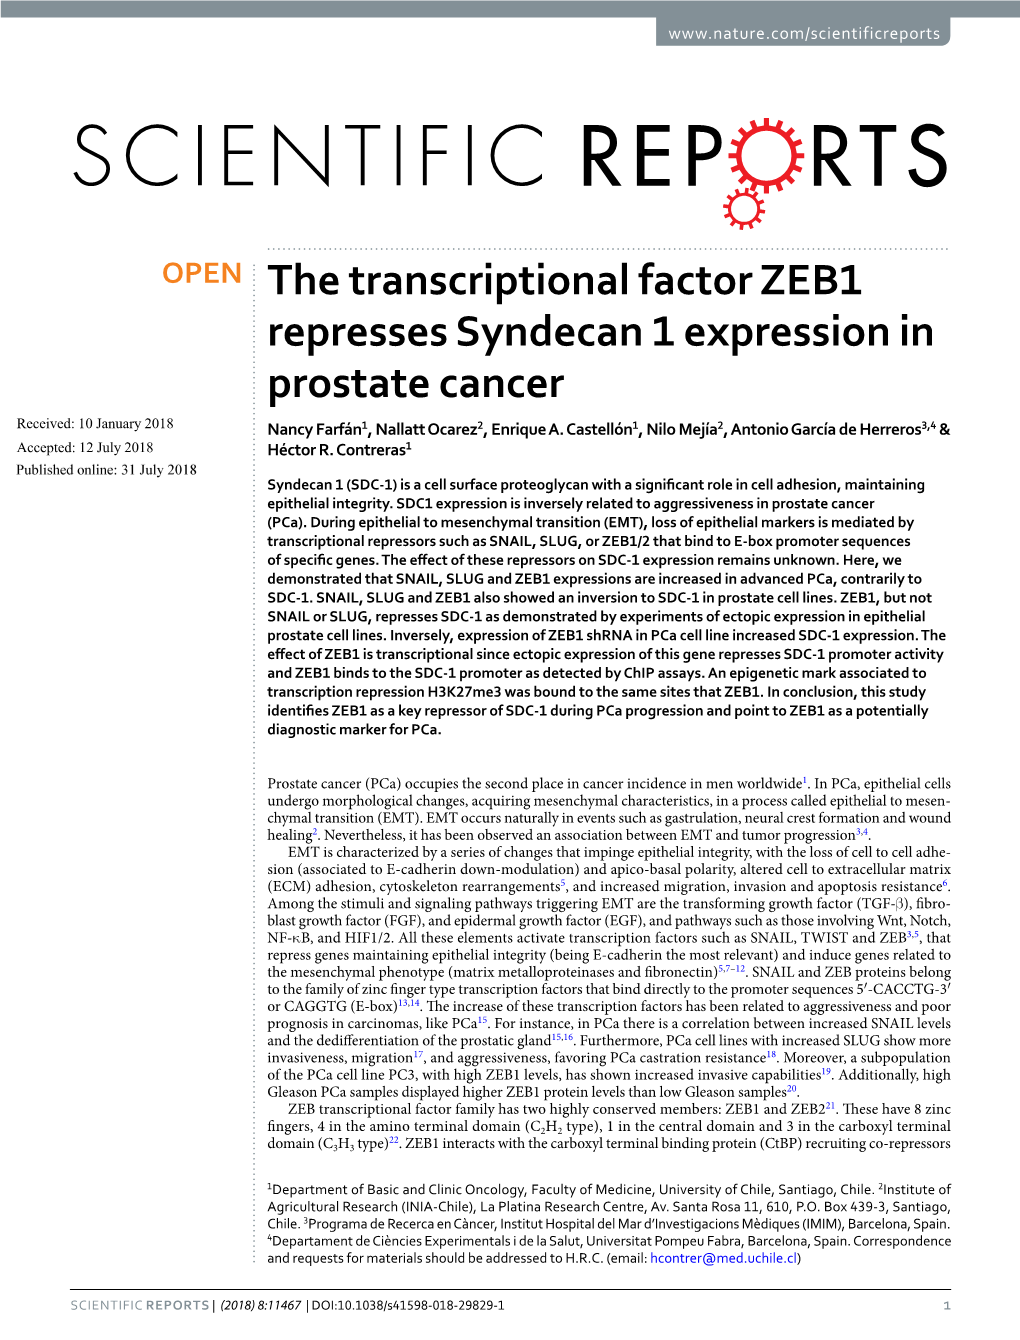 The Transcriptional Factor ZEB1 Represses Syndecan 1 Expression in Prostate Cancer Received: 10 January 2018 Nancy Farfán1, Nallatt Ocarez2, Enrique A